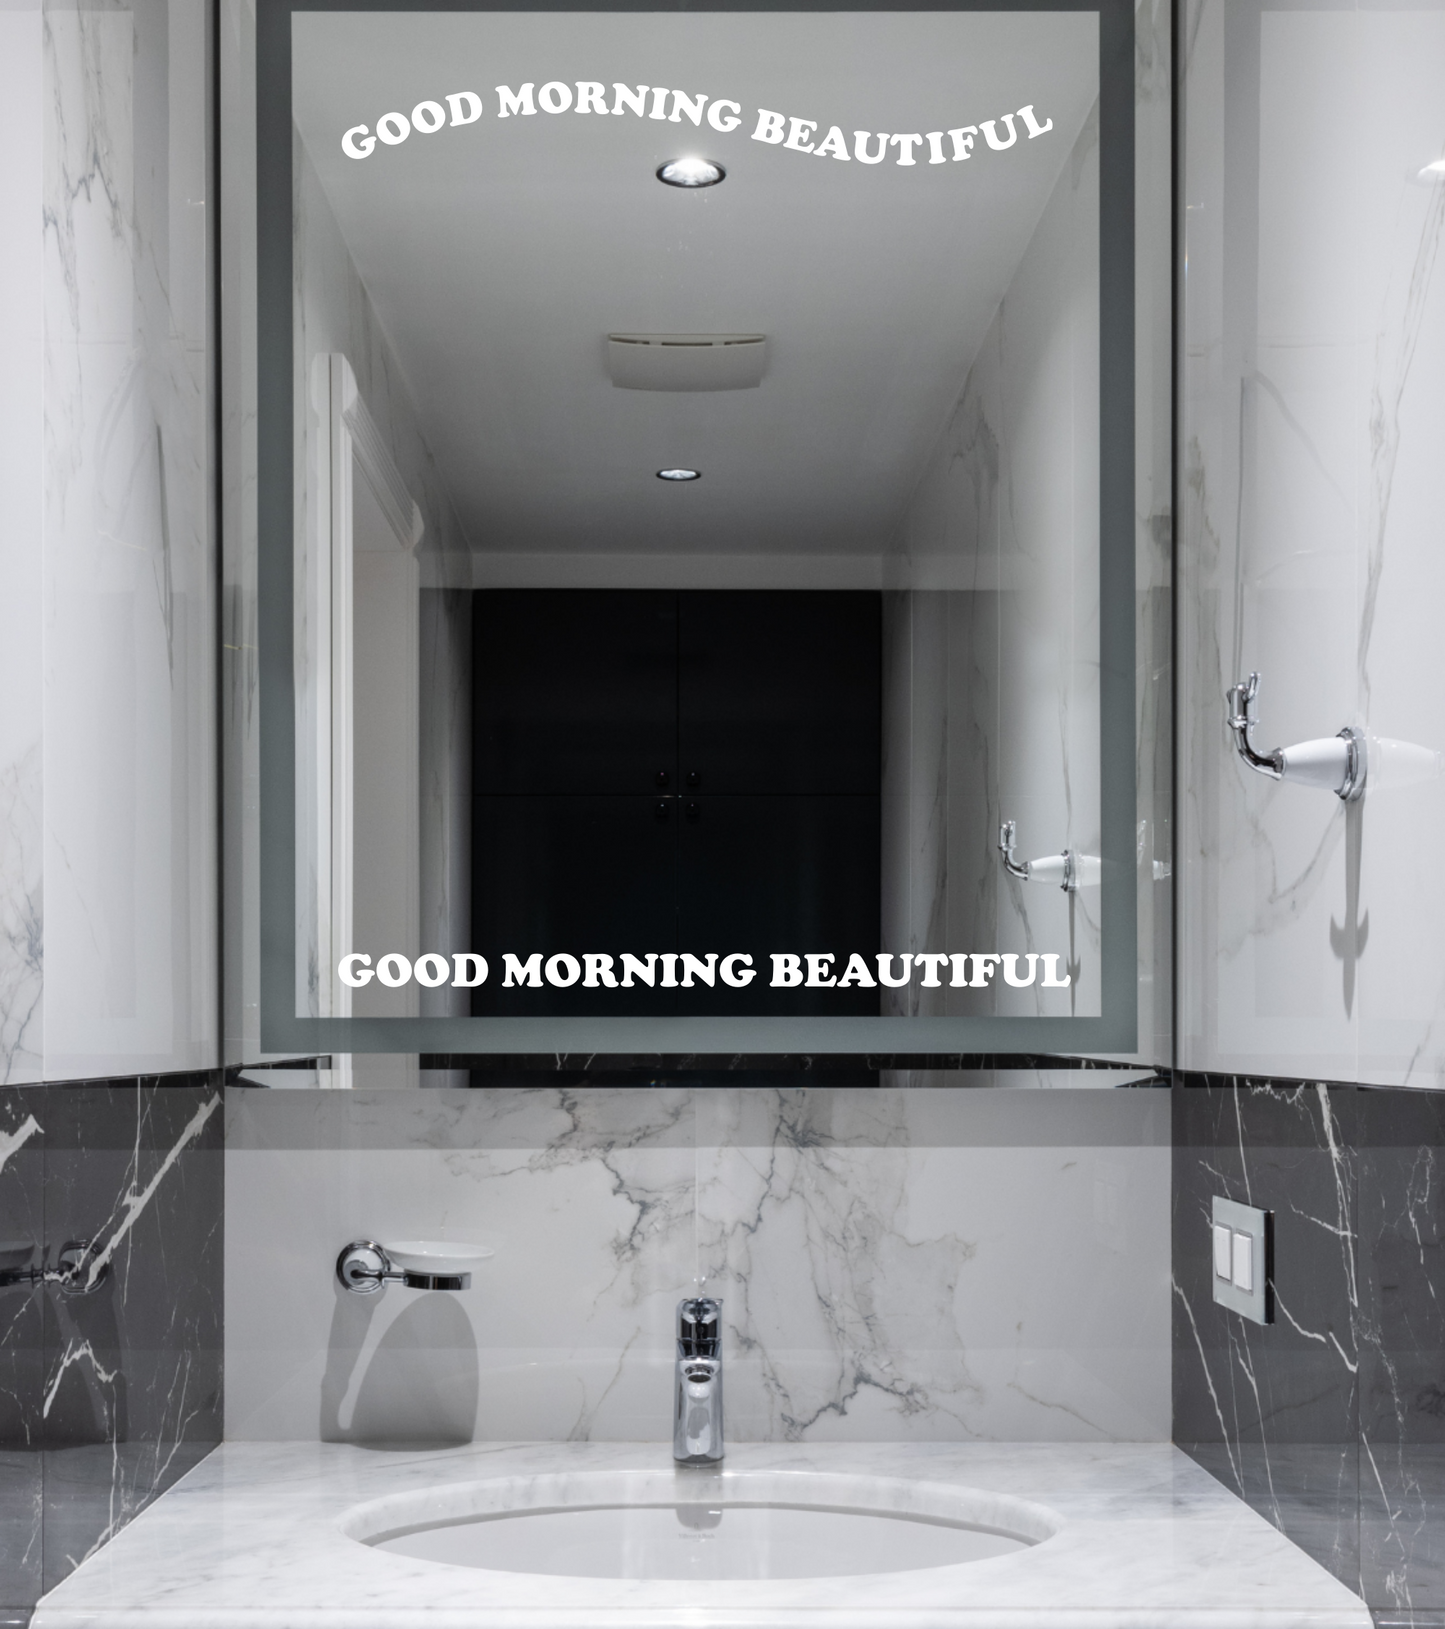 Good Morning Beautiful Vinyl Decal, Vanity Mirror Decal, Decal for Women, Positive Affirmation Decal